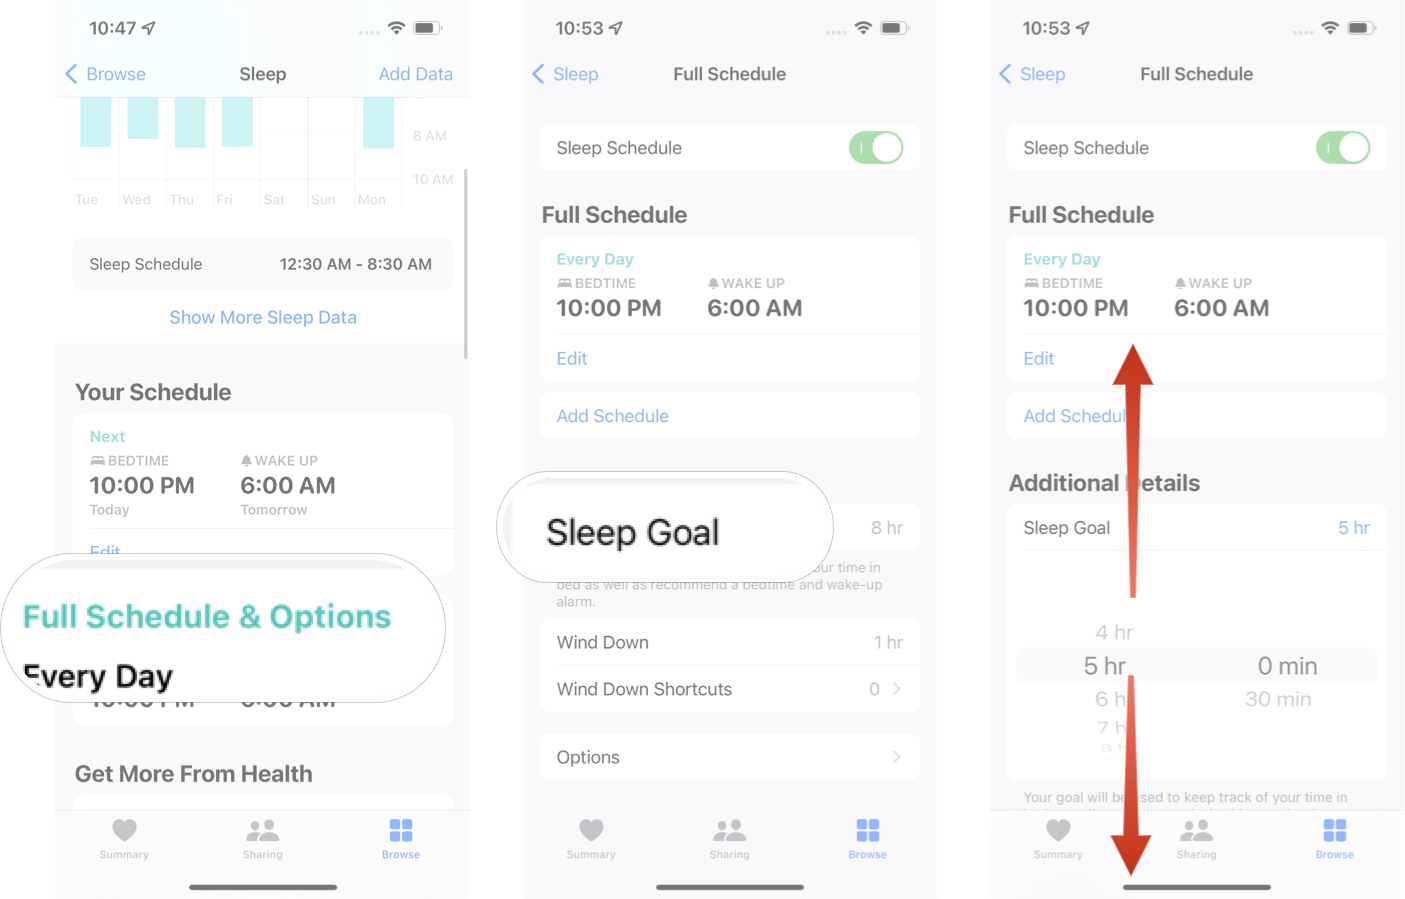 Editing A Sleep Goal In iOS 15: Tap full schedule & options, tap sleep goal, and then adjust the amount of time you want.